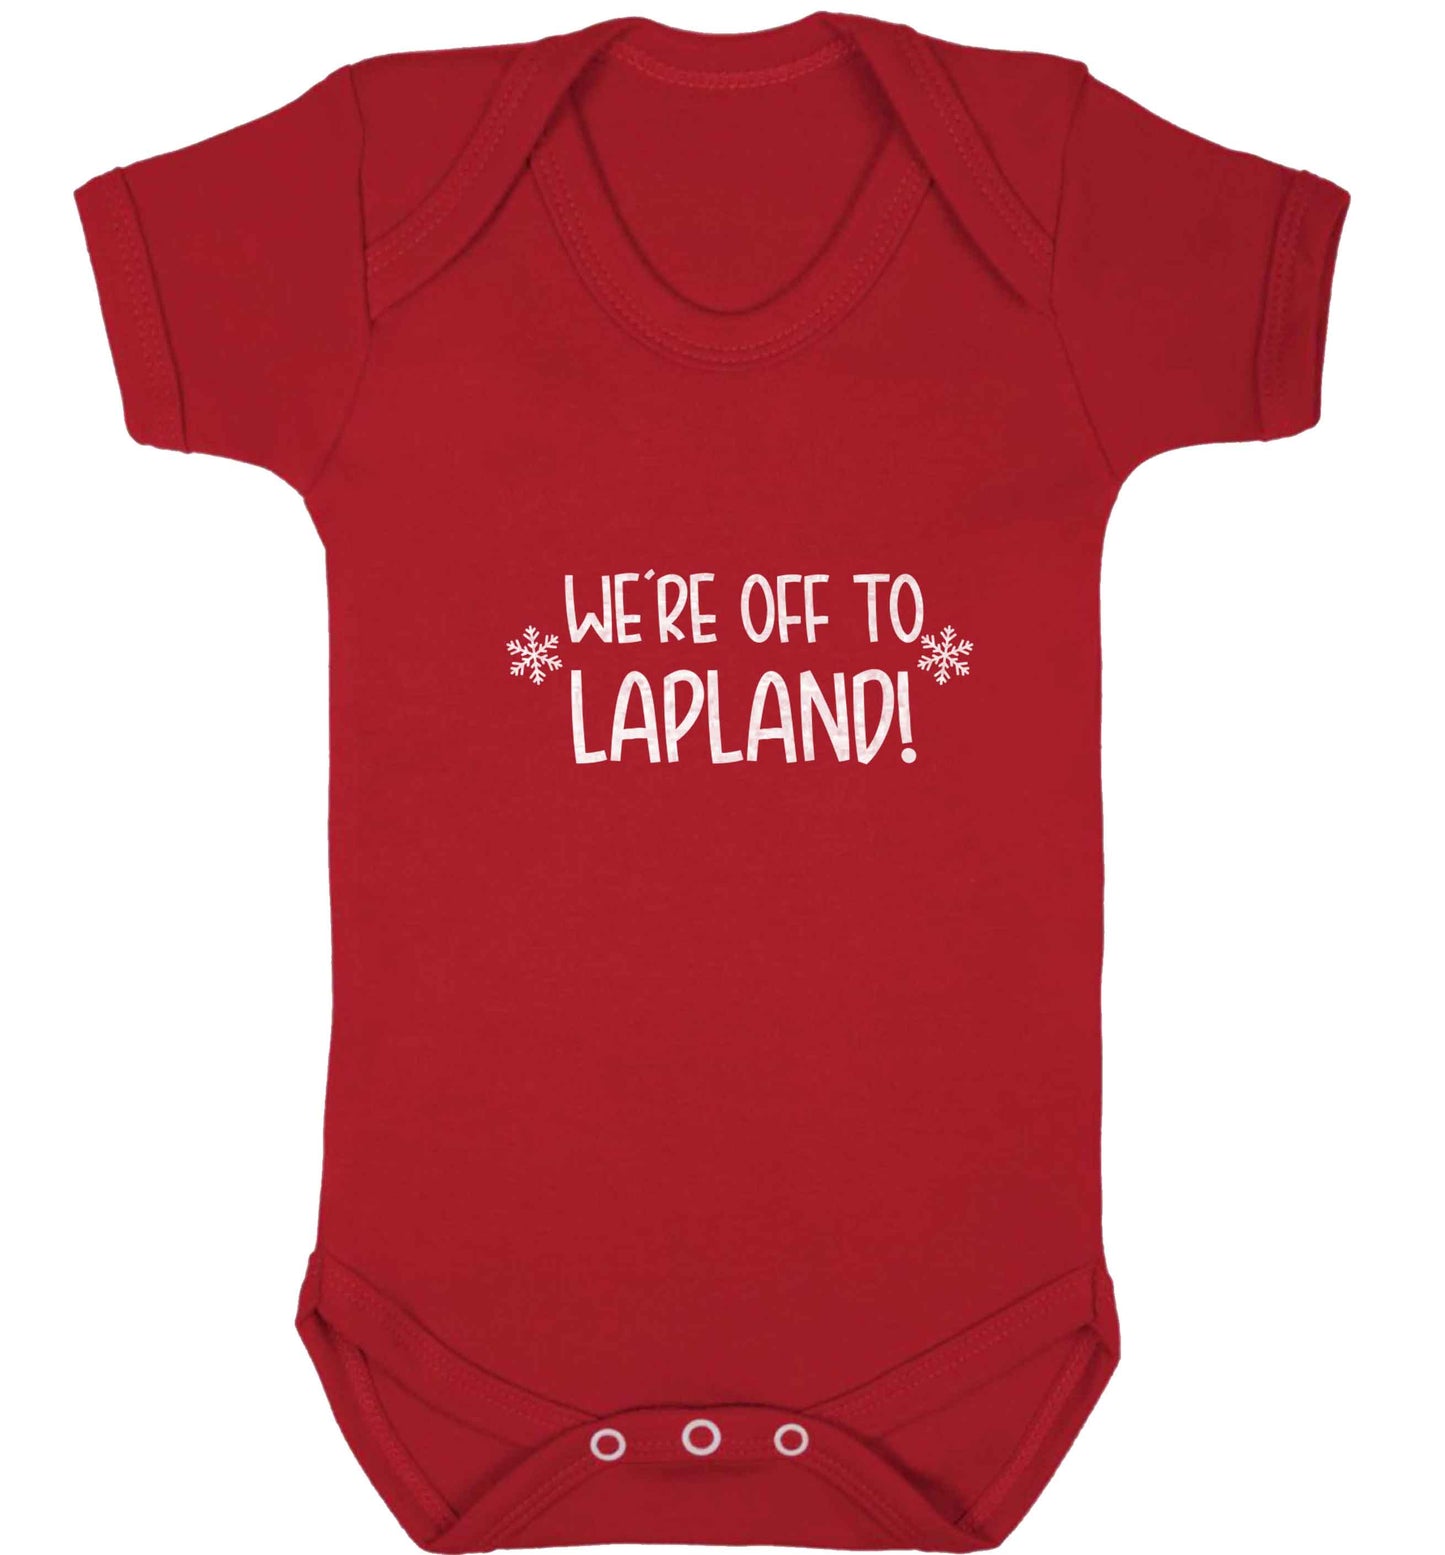 We're off to Lapland baby vest red 18-24 months